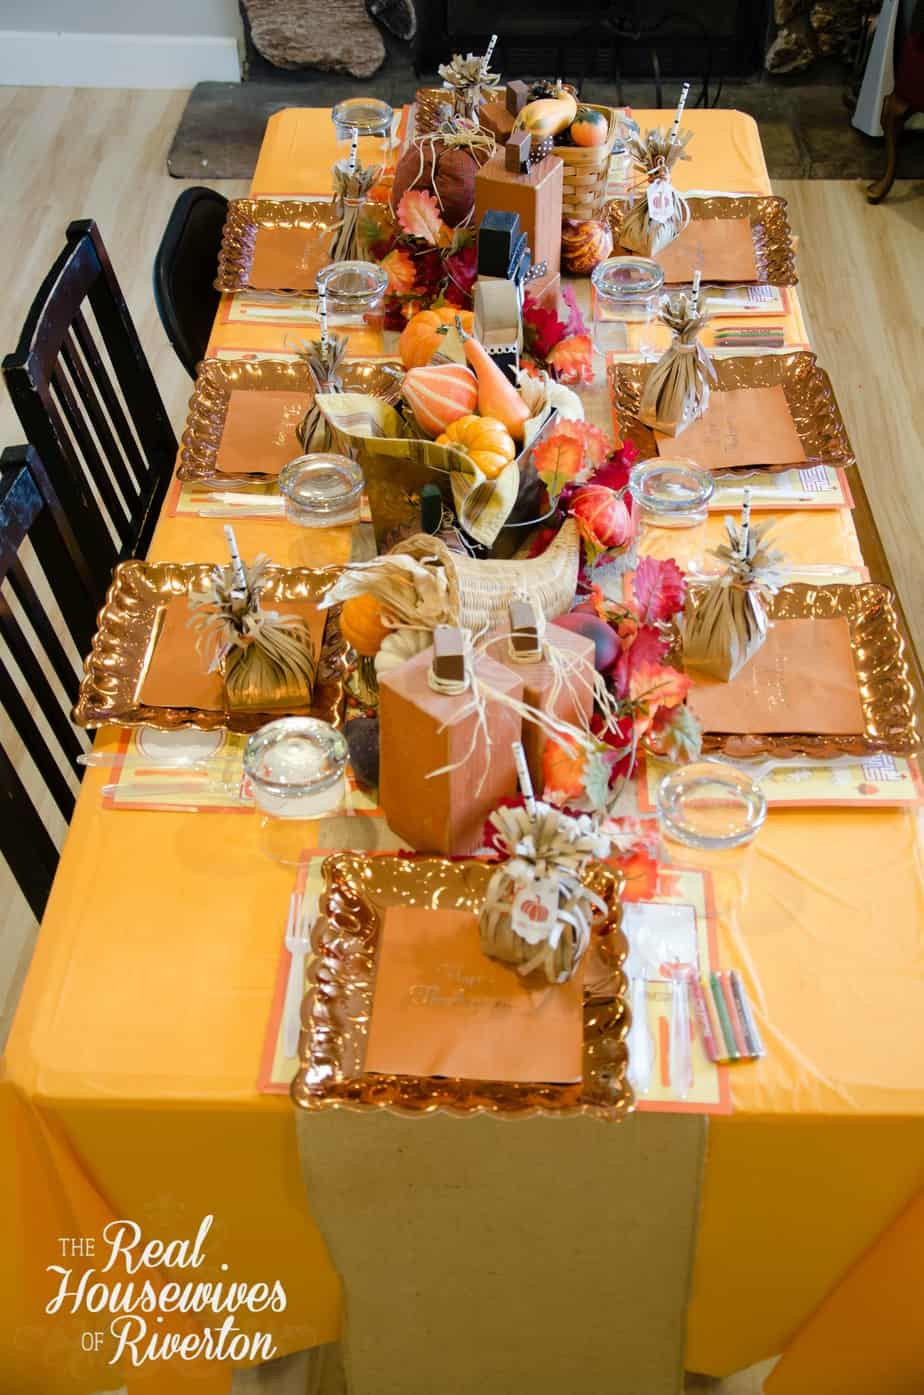 Thanksgiving Table Decorations
 Kid s Thanksgiving Table Decor Housewives Style